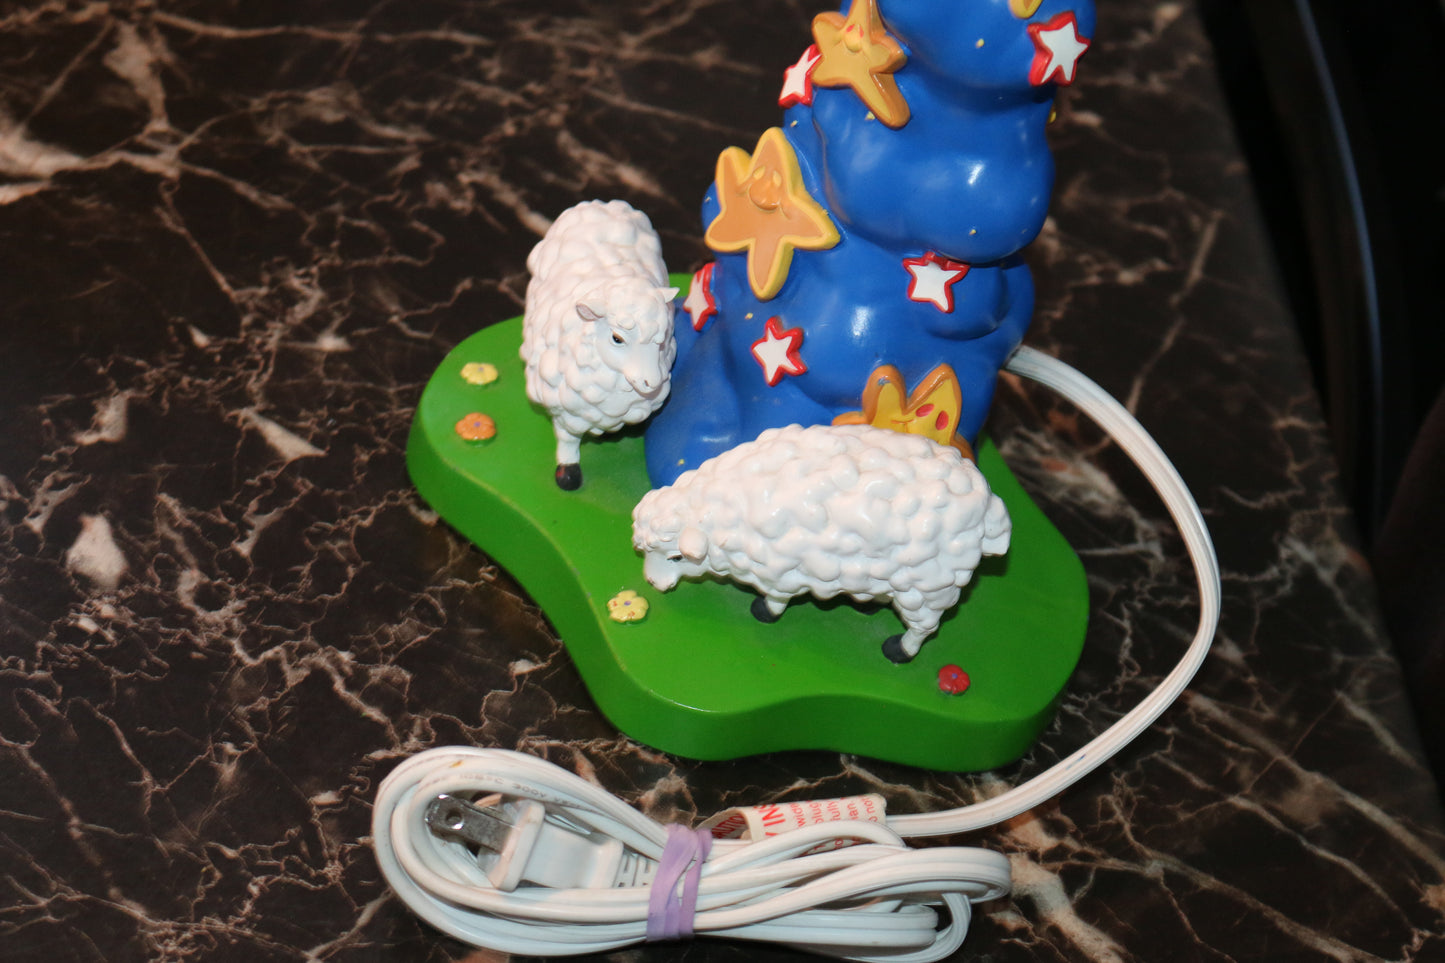 Lamp Lamb Sheep For Luz Kid Decoration For Night